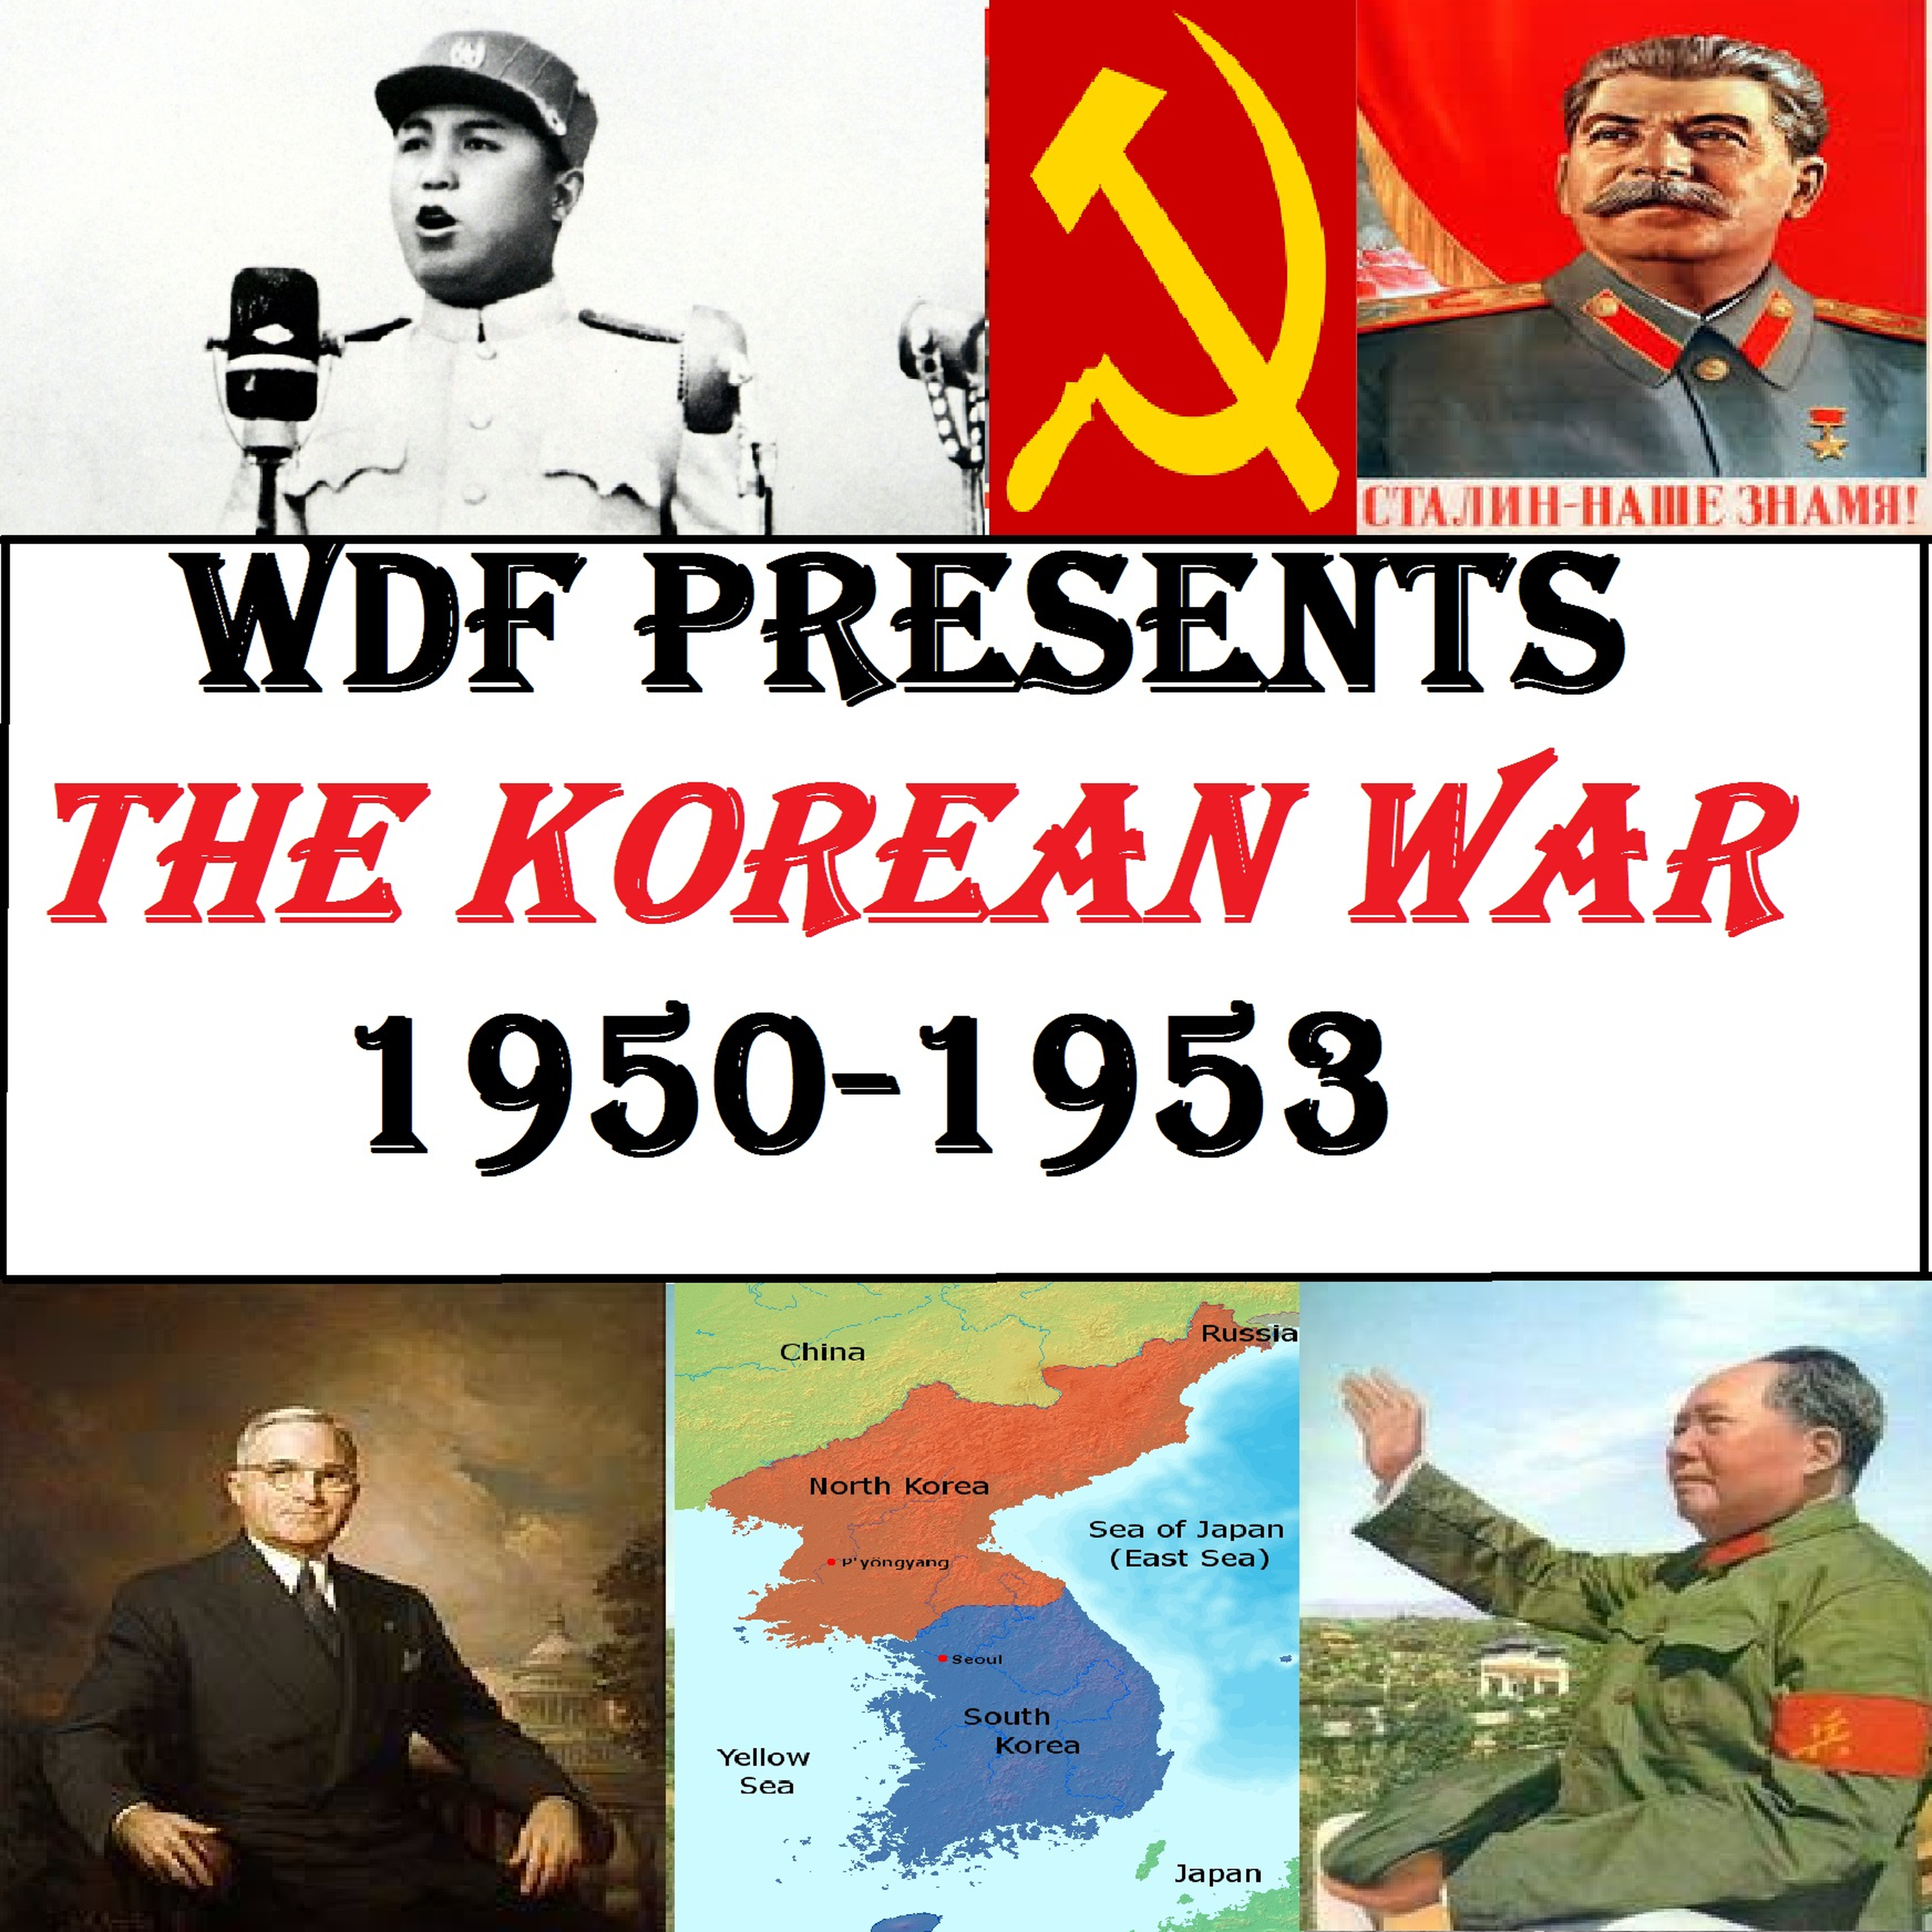 Korean War #29: With Allies Like These 